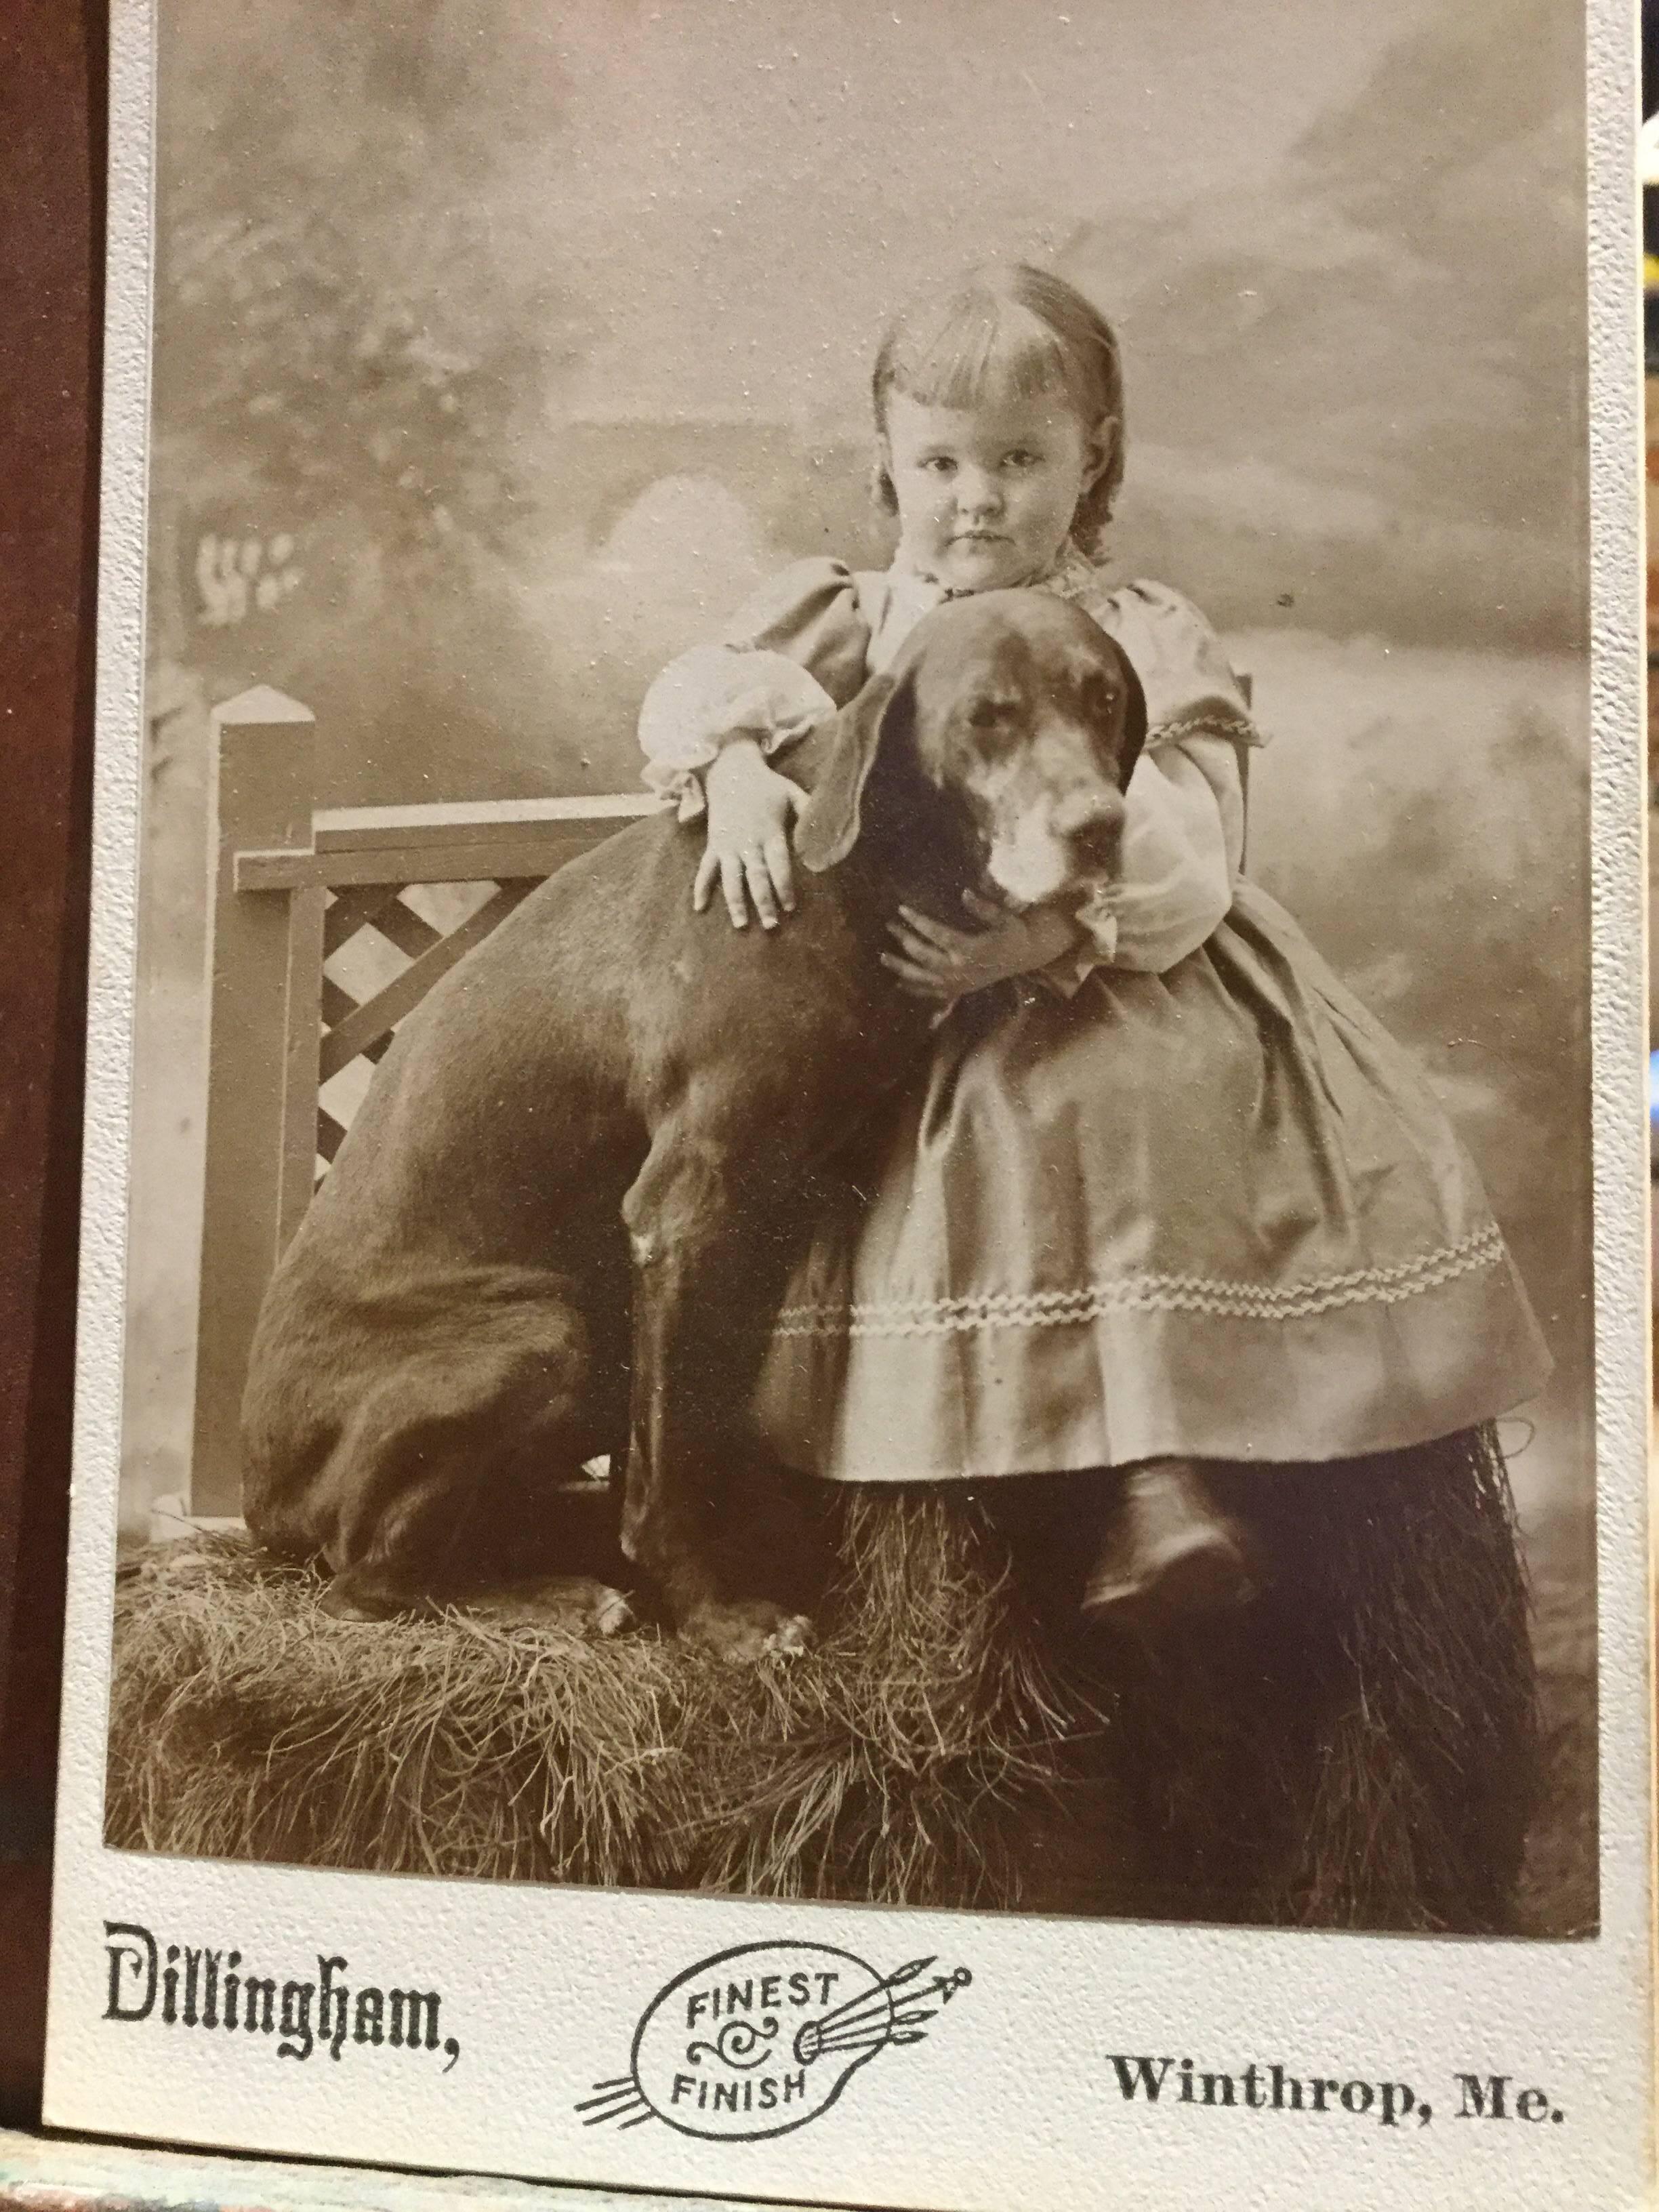 Large CDV or carte de visite of child with her dog by a Maine photographer. Great image!